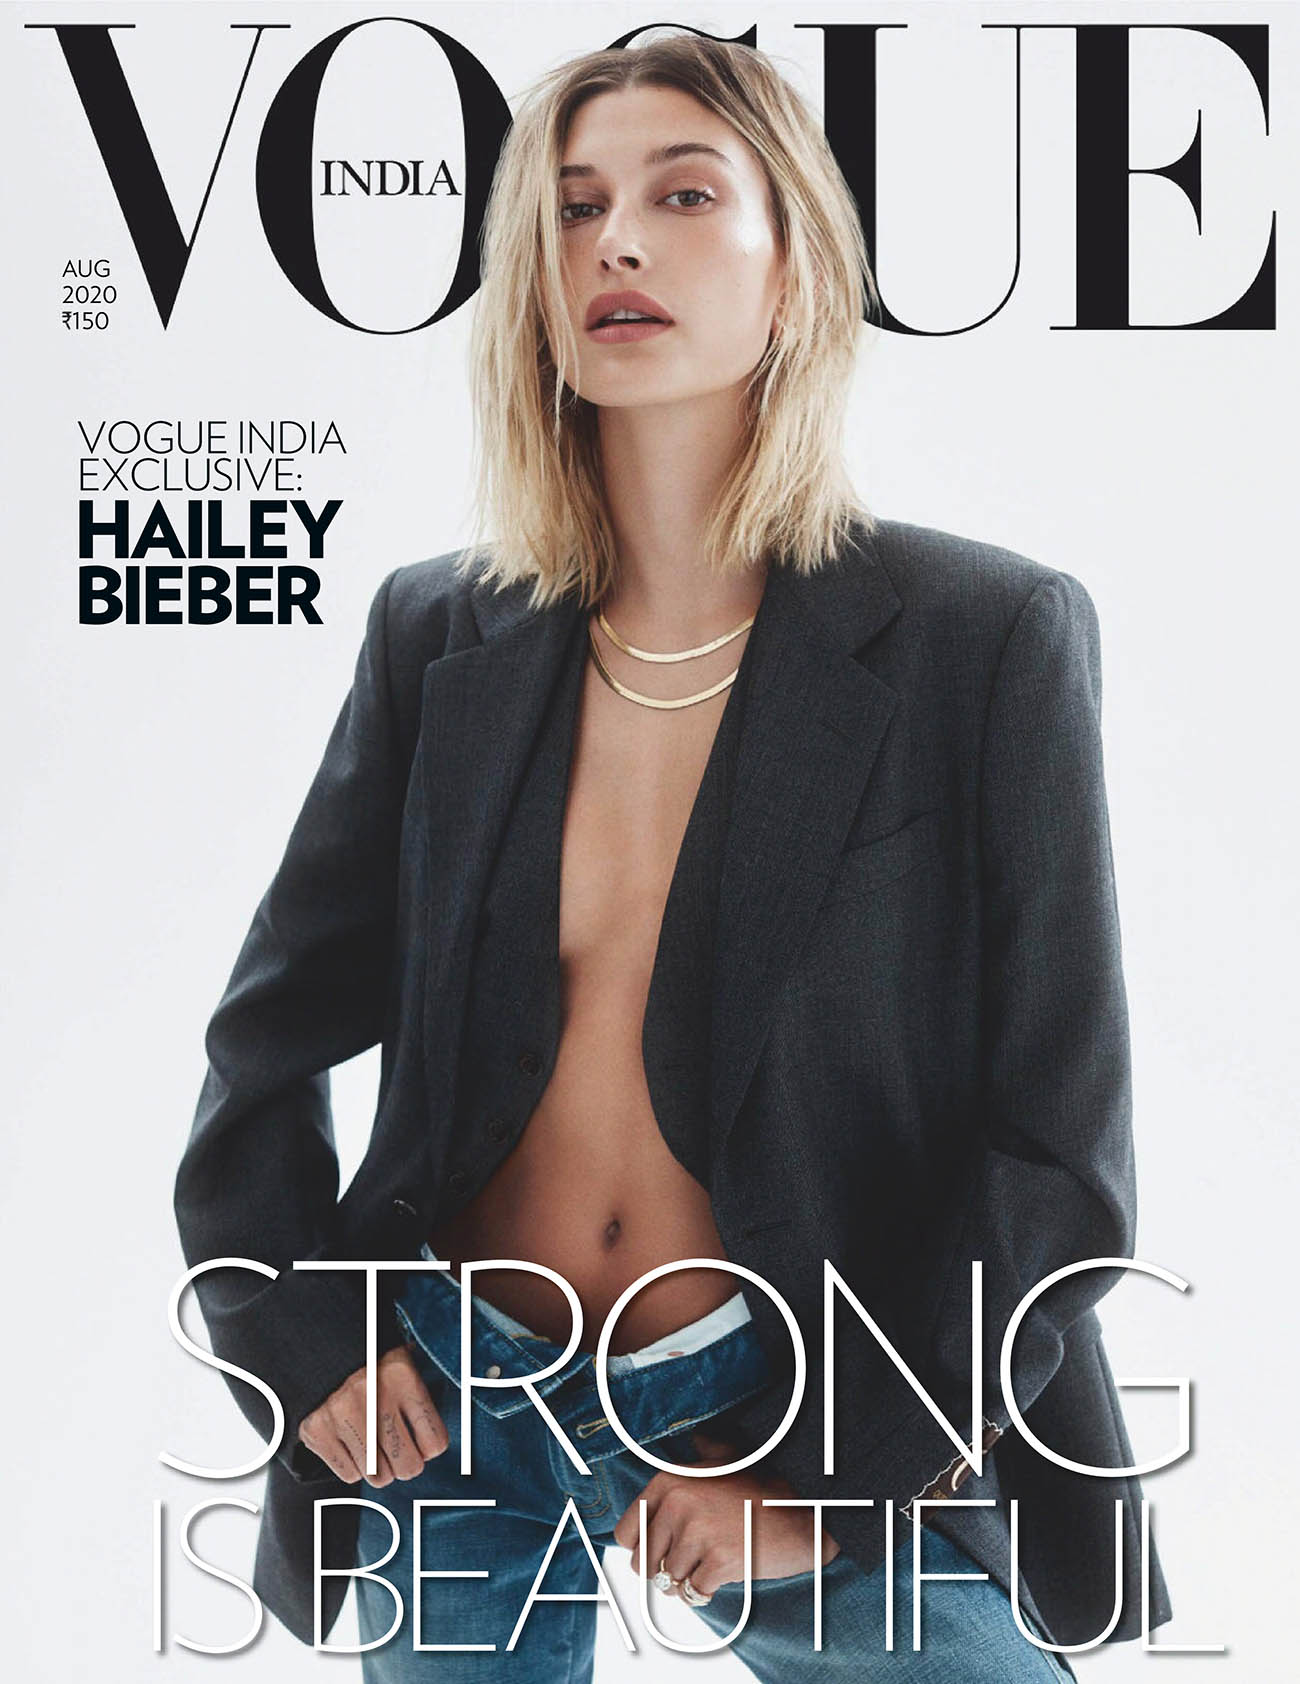 Hailey Bieber covers Vogue India August 2020 by Zoey Grossman